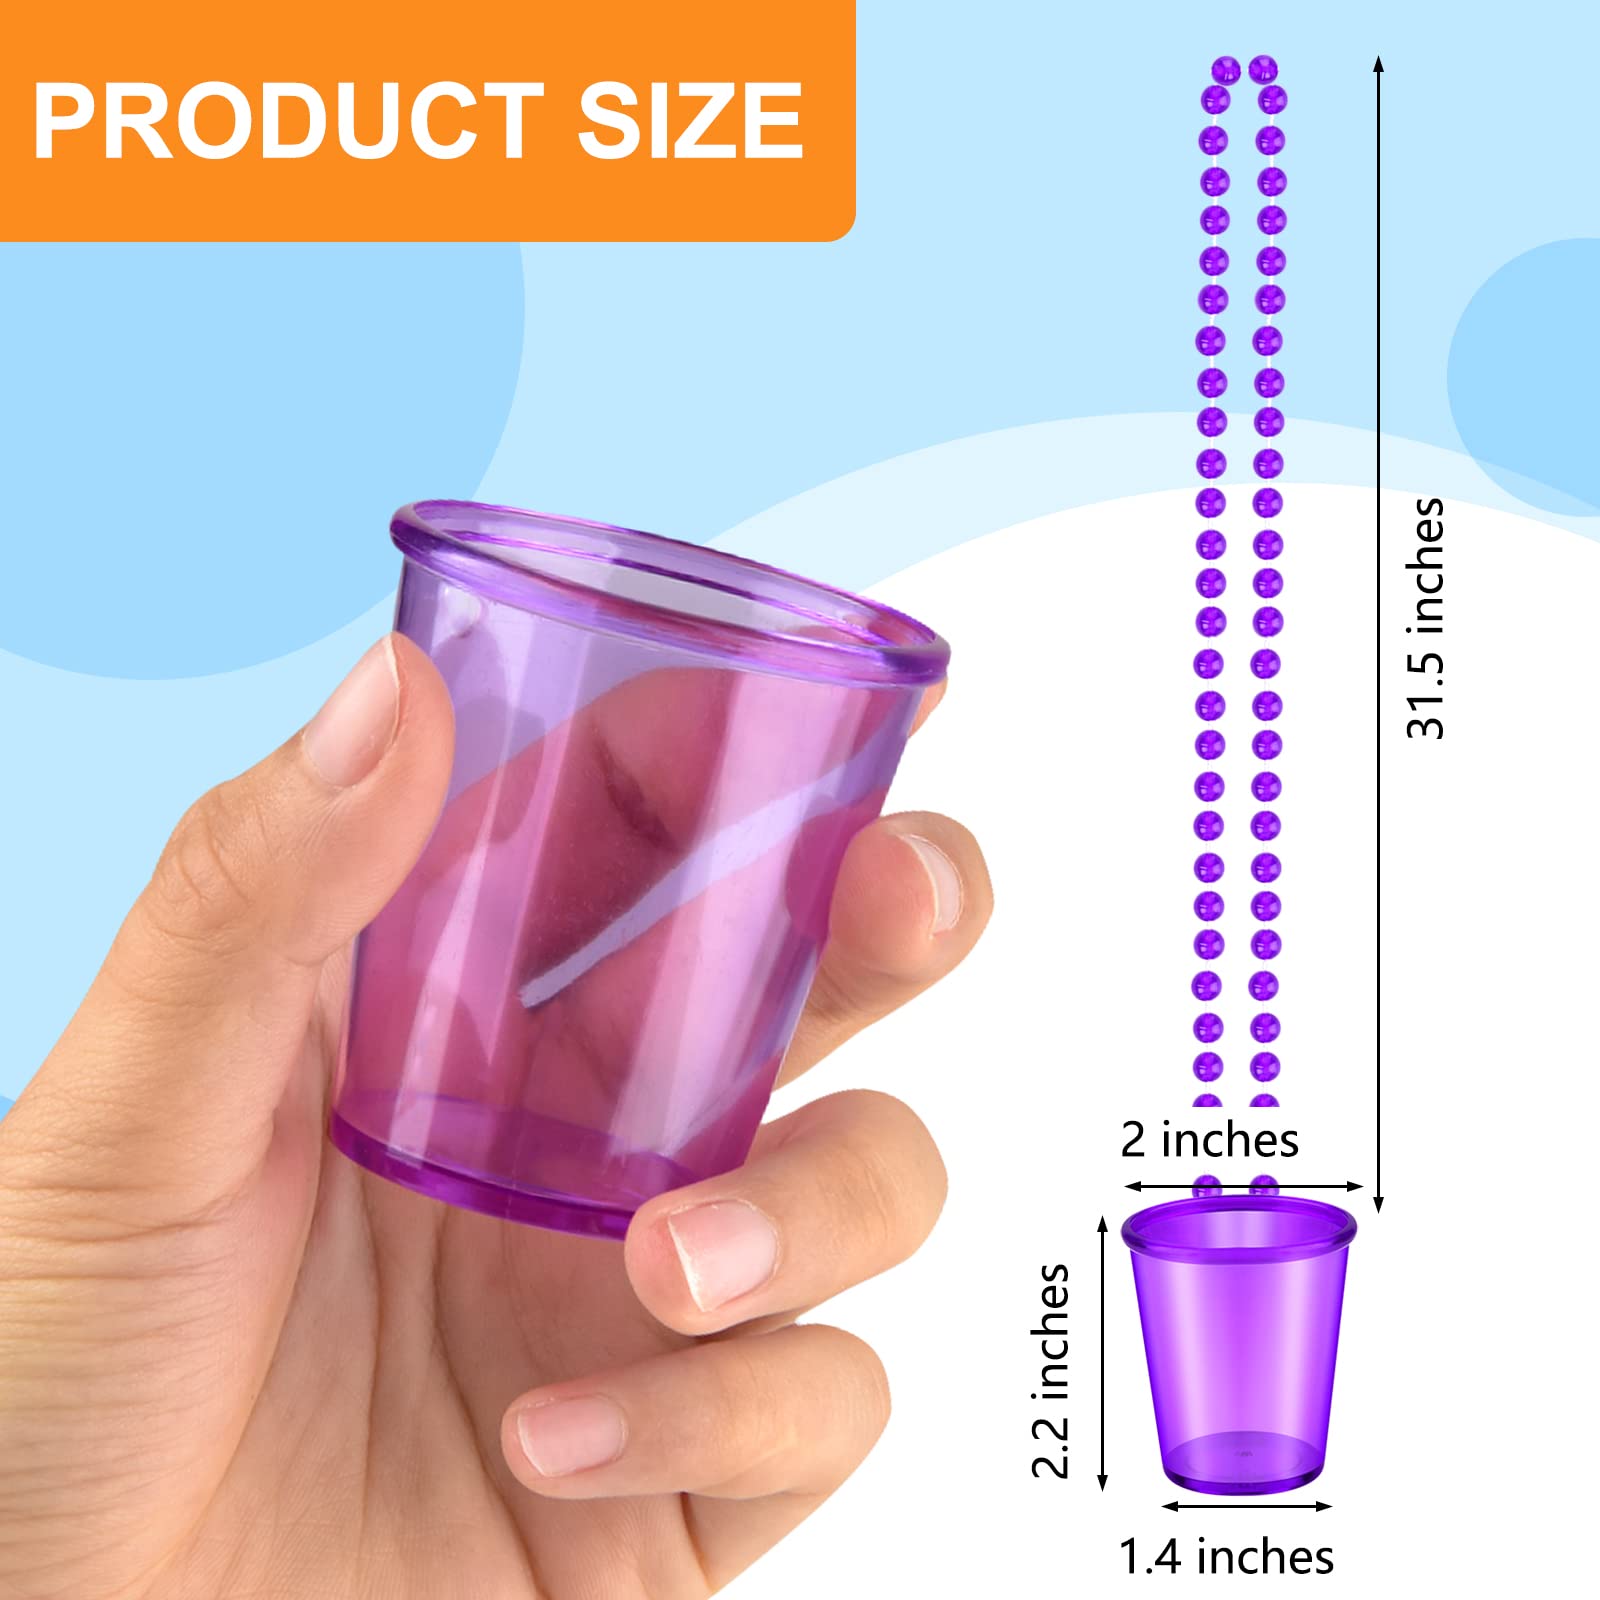 24 Pieces Shot Glass on Beaded Necklace Shot Glass Necklaces Plastic Shot Cup Necklace for Team Groom and Bride Supplies Bachelorette Party Birthday Wedding Party Festival Parade (6 Colors)